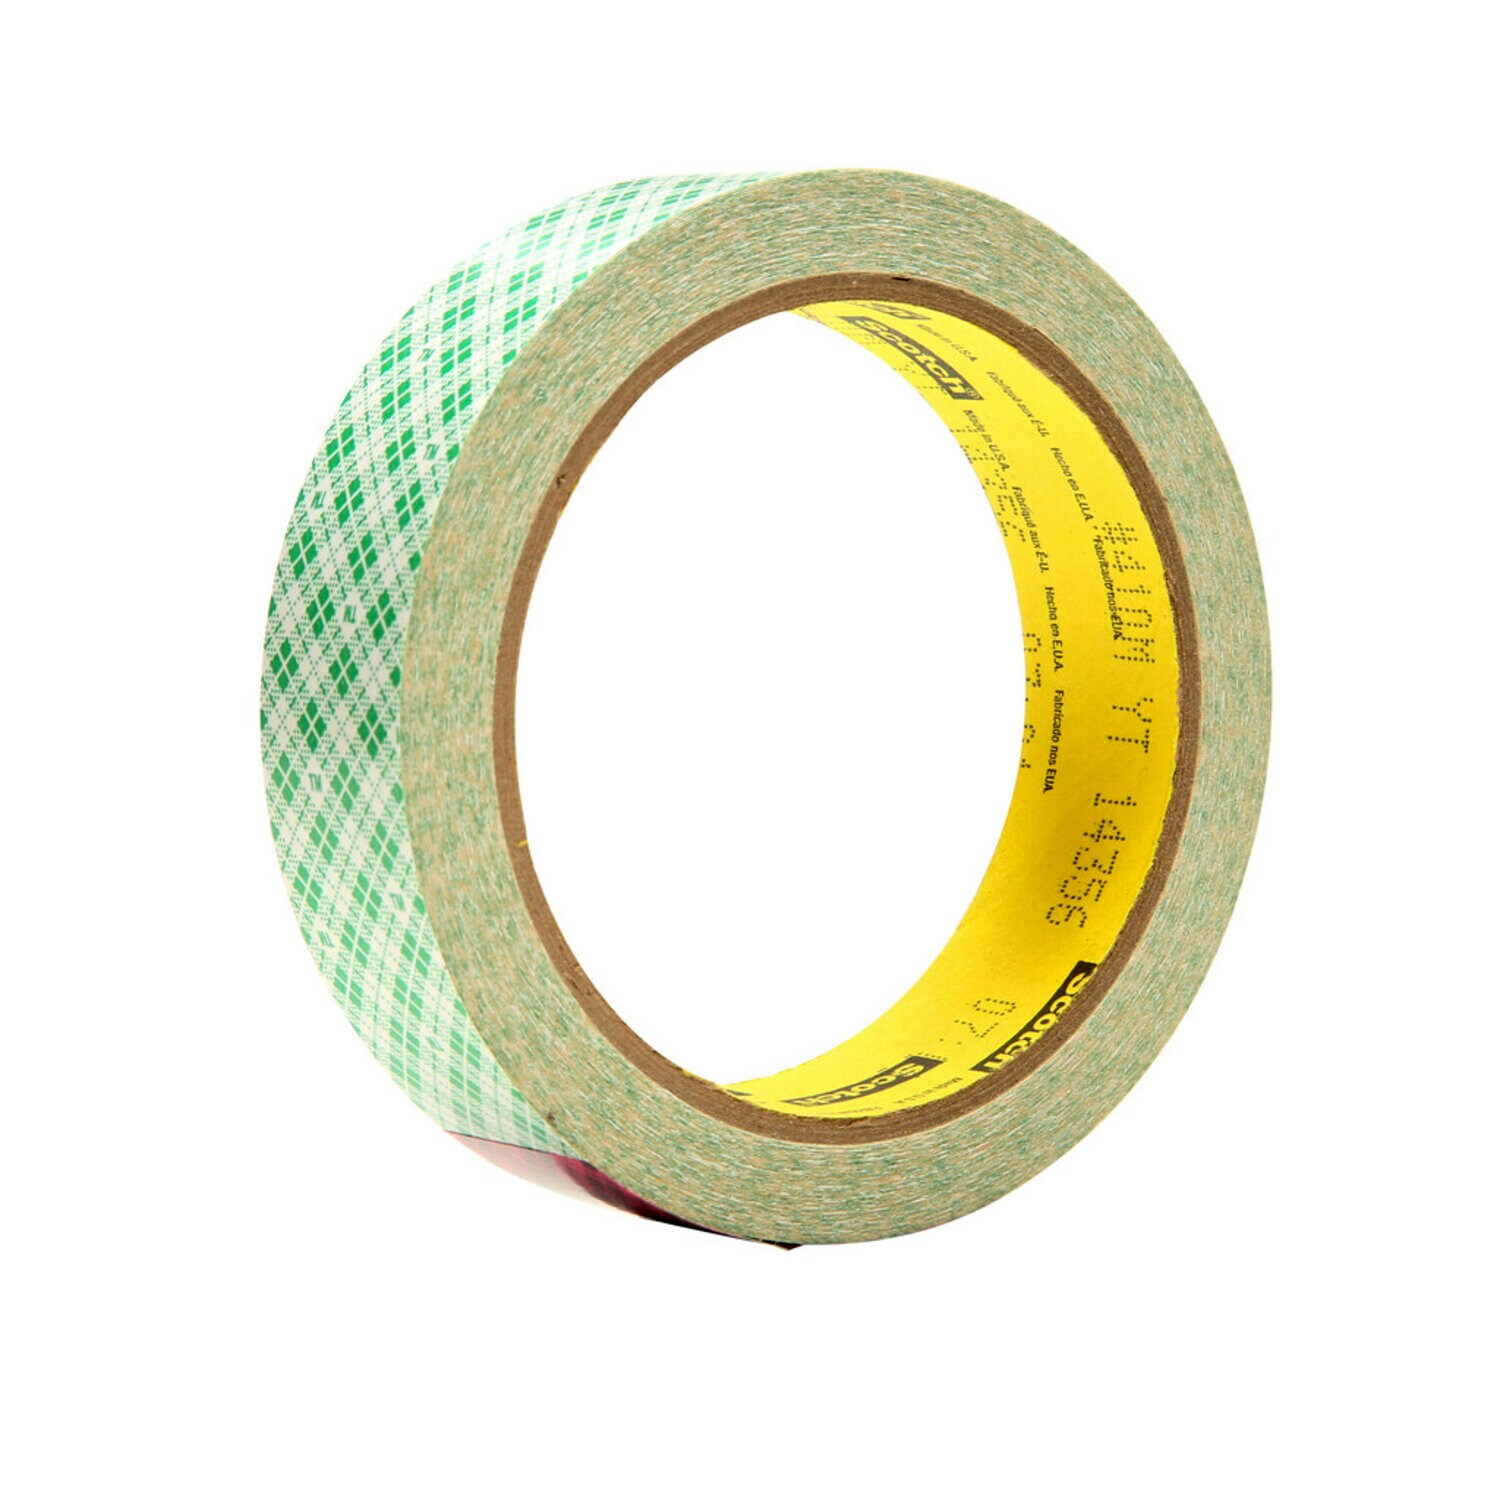 7010373939 - 3M Double Coated Paper Tape 410M, Natural, 1 in x 10 yd, 5 mil, 36
rolls per case